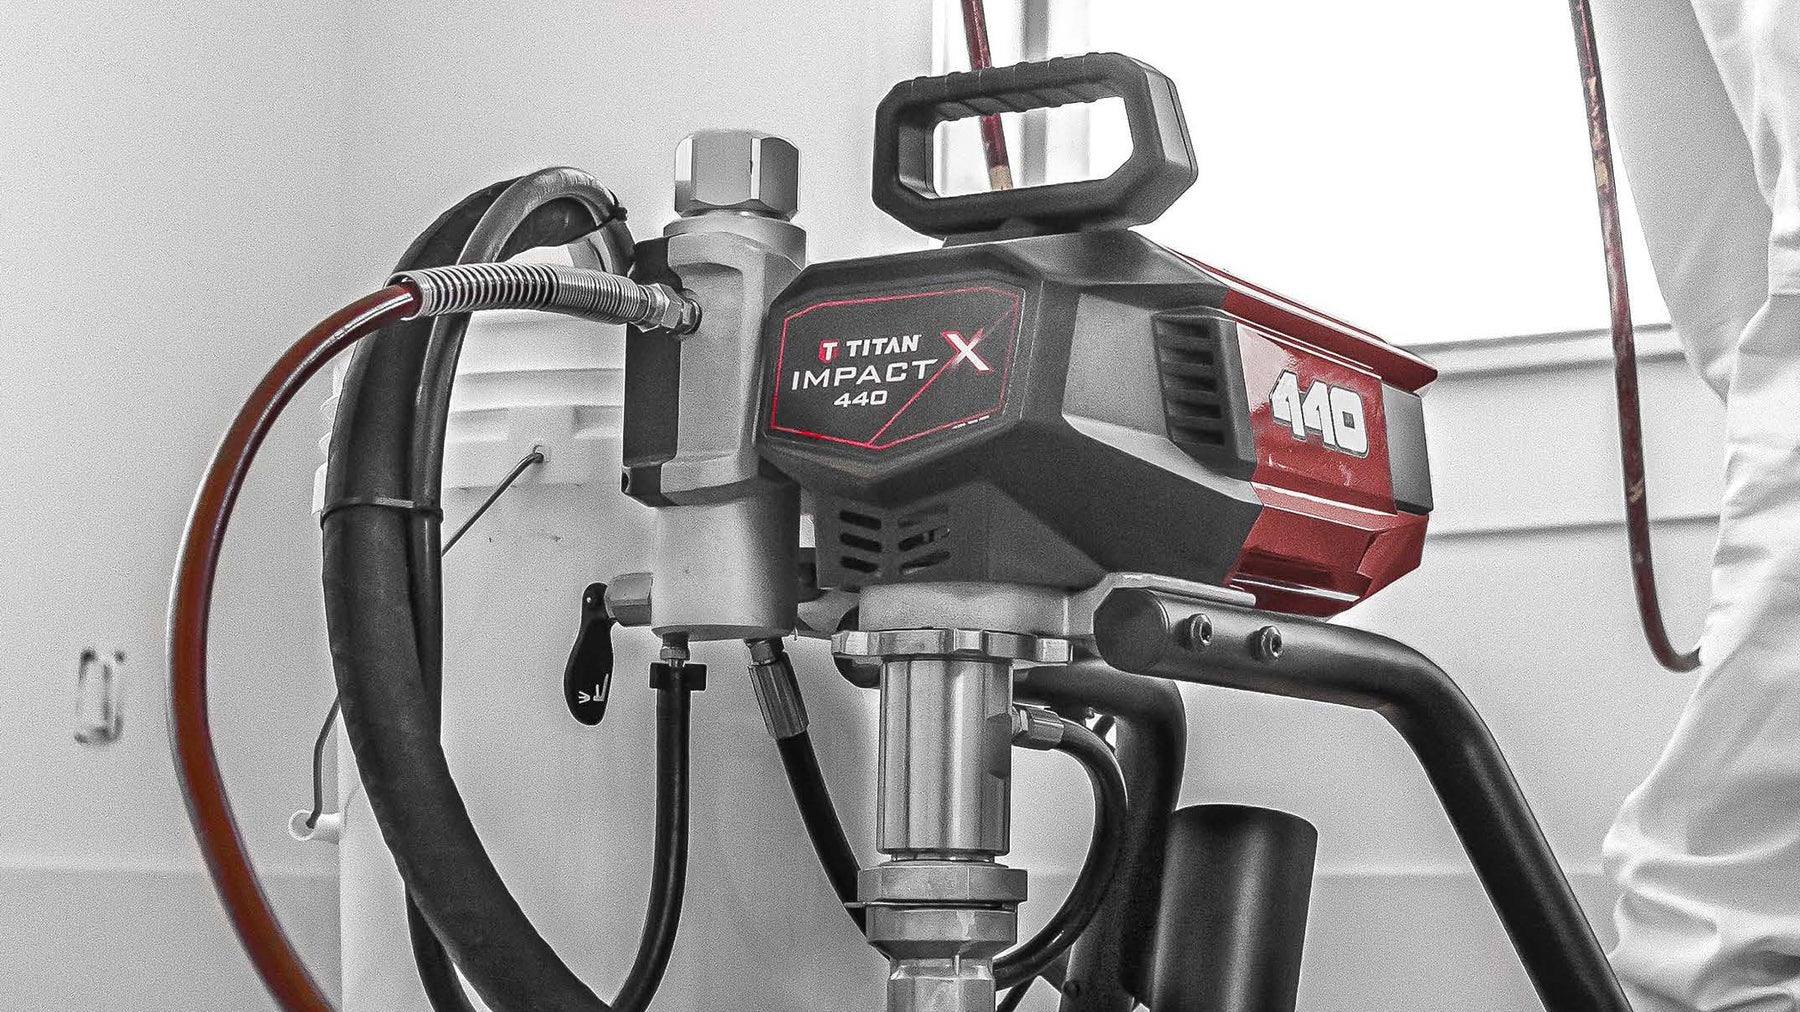 Make an Impact with the Titan Impact X 440 Electric Airless Sprayer